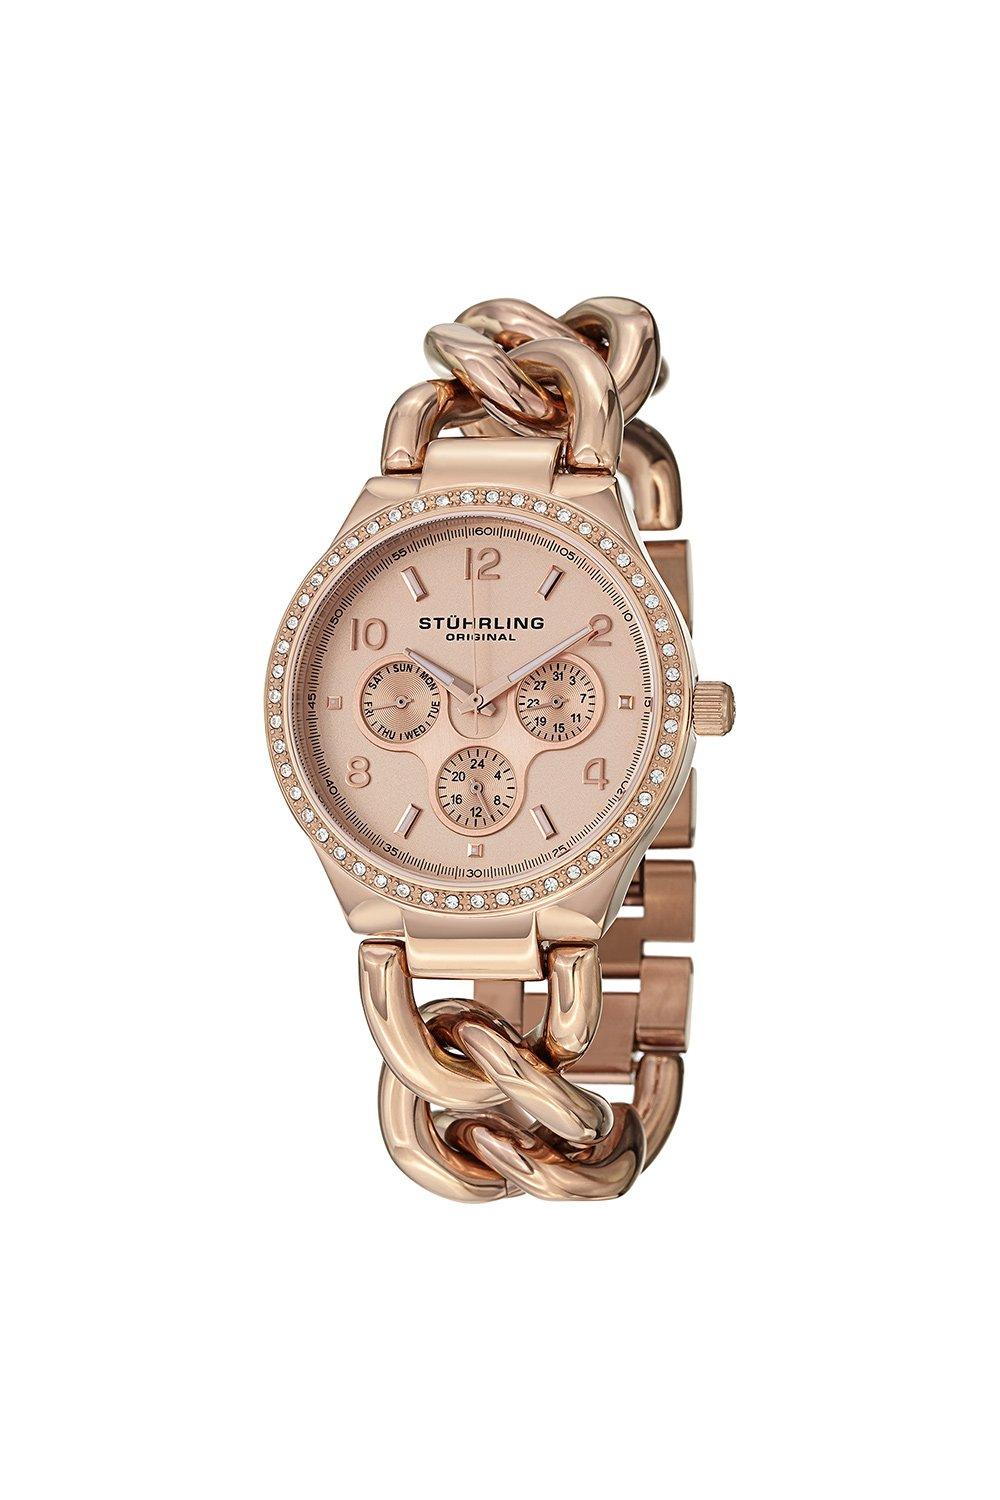 Watches | Women's 813S.04 Vogue Renoir Day and Date Crystal